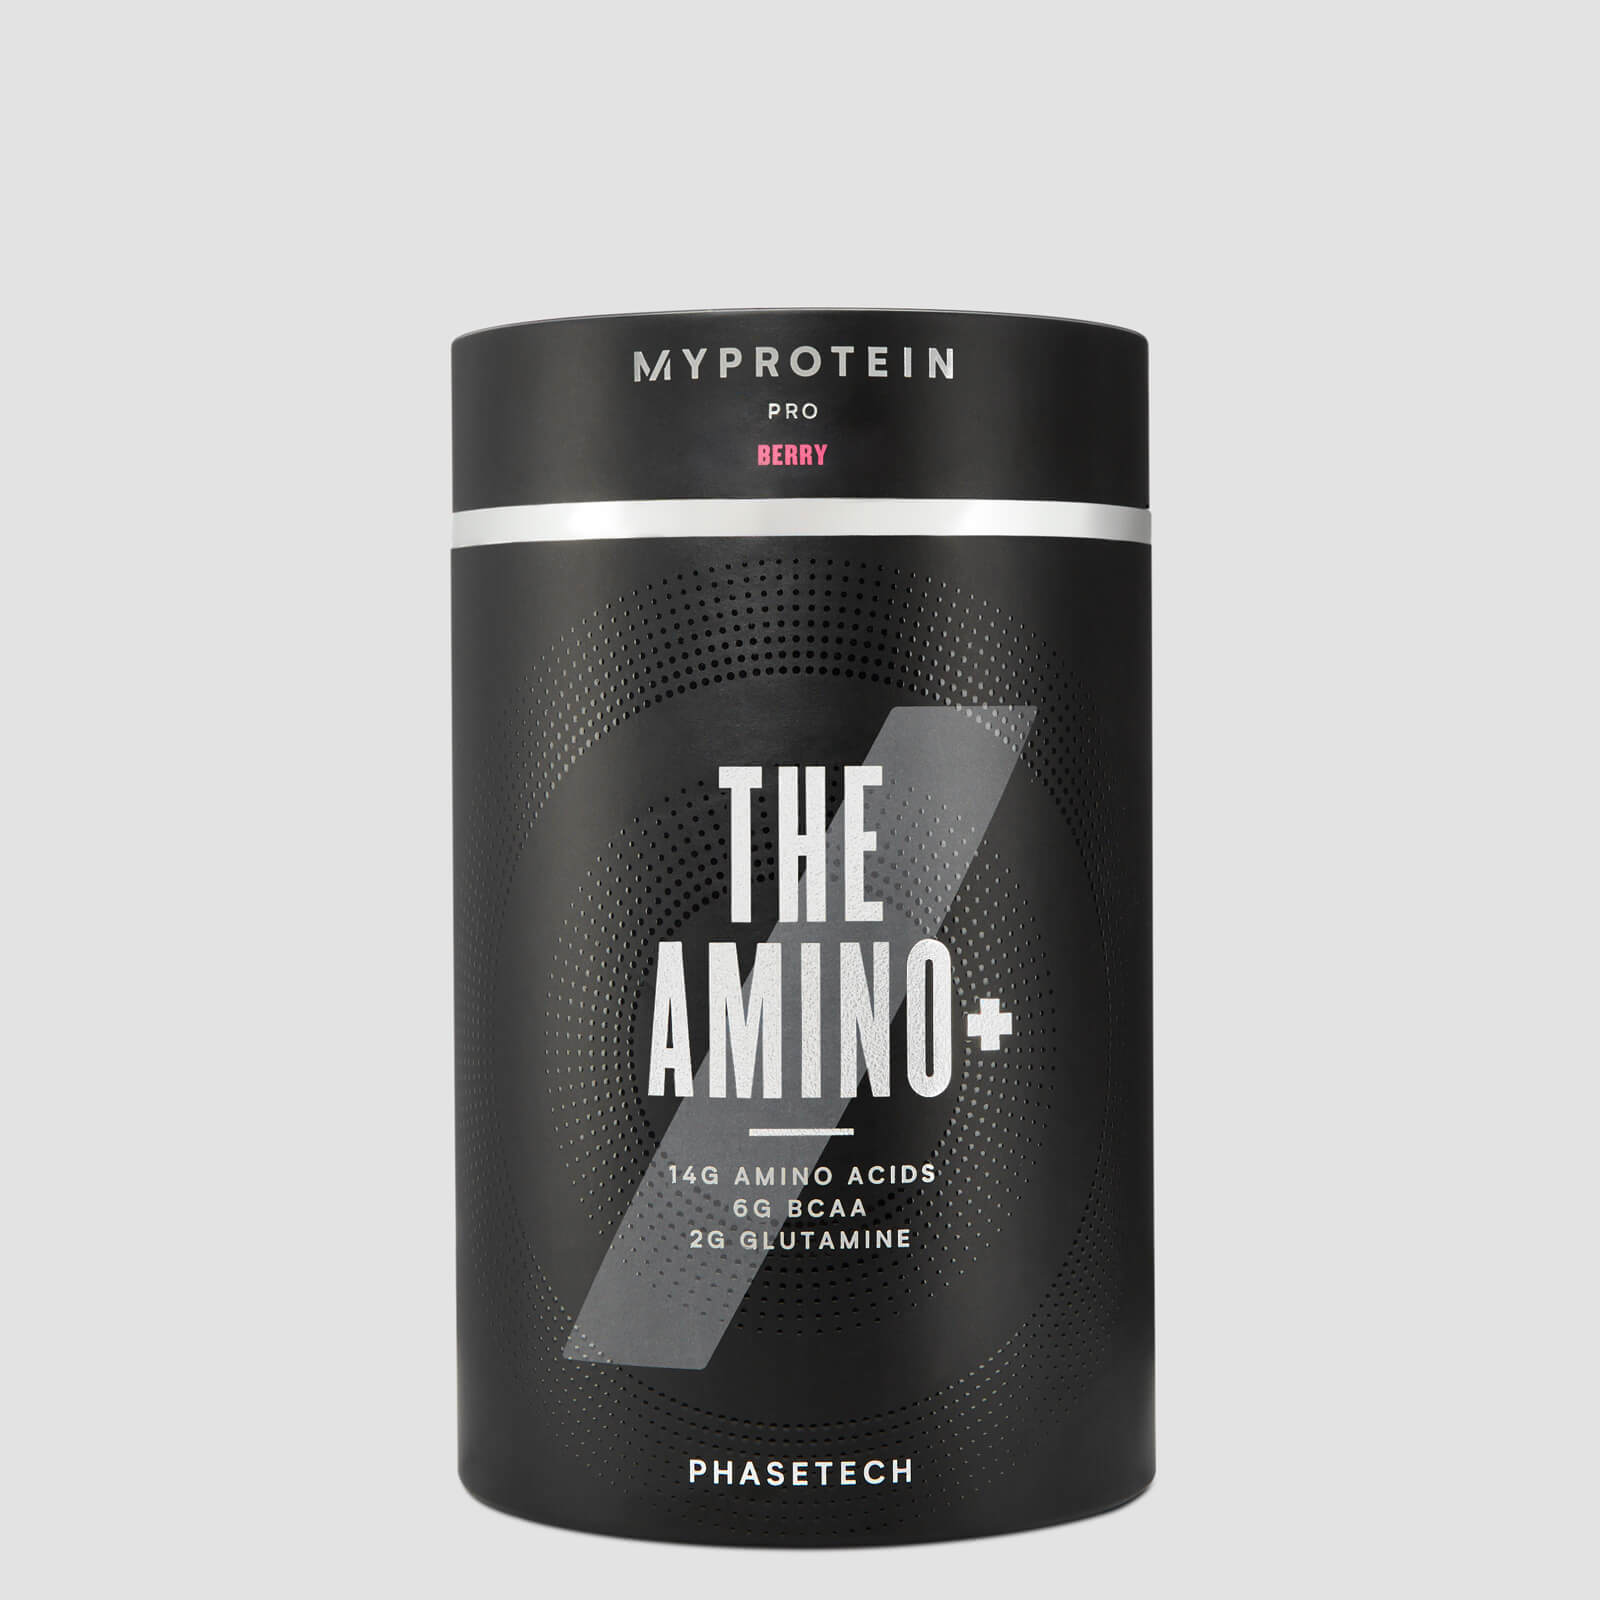 Myprotein THE Amino+ - 20servings - Bacche